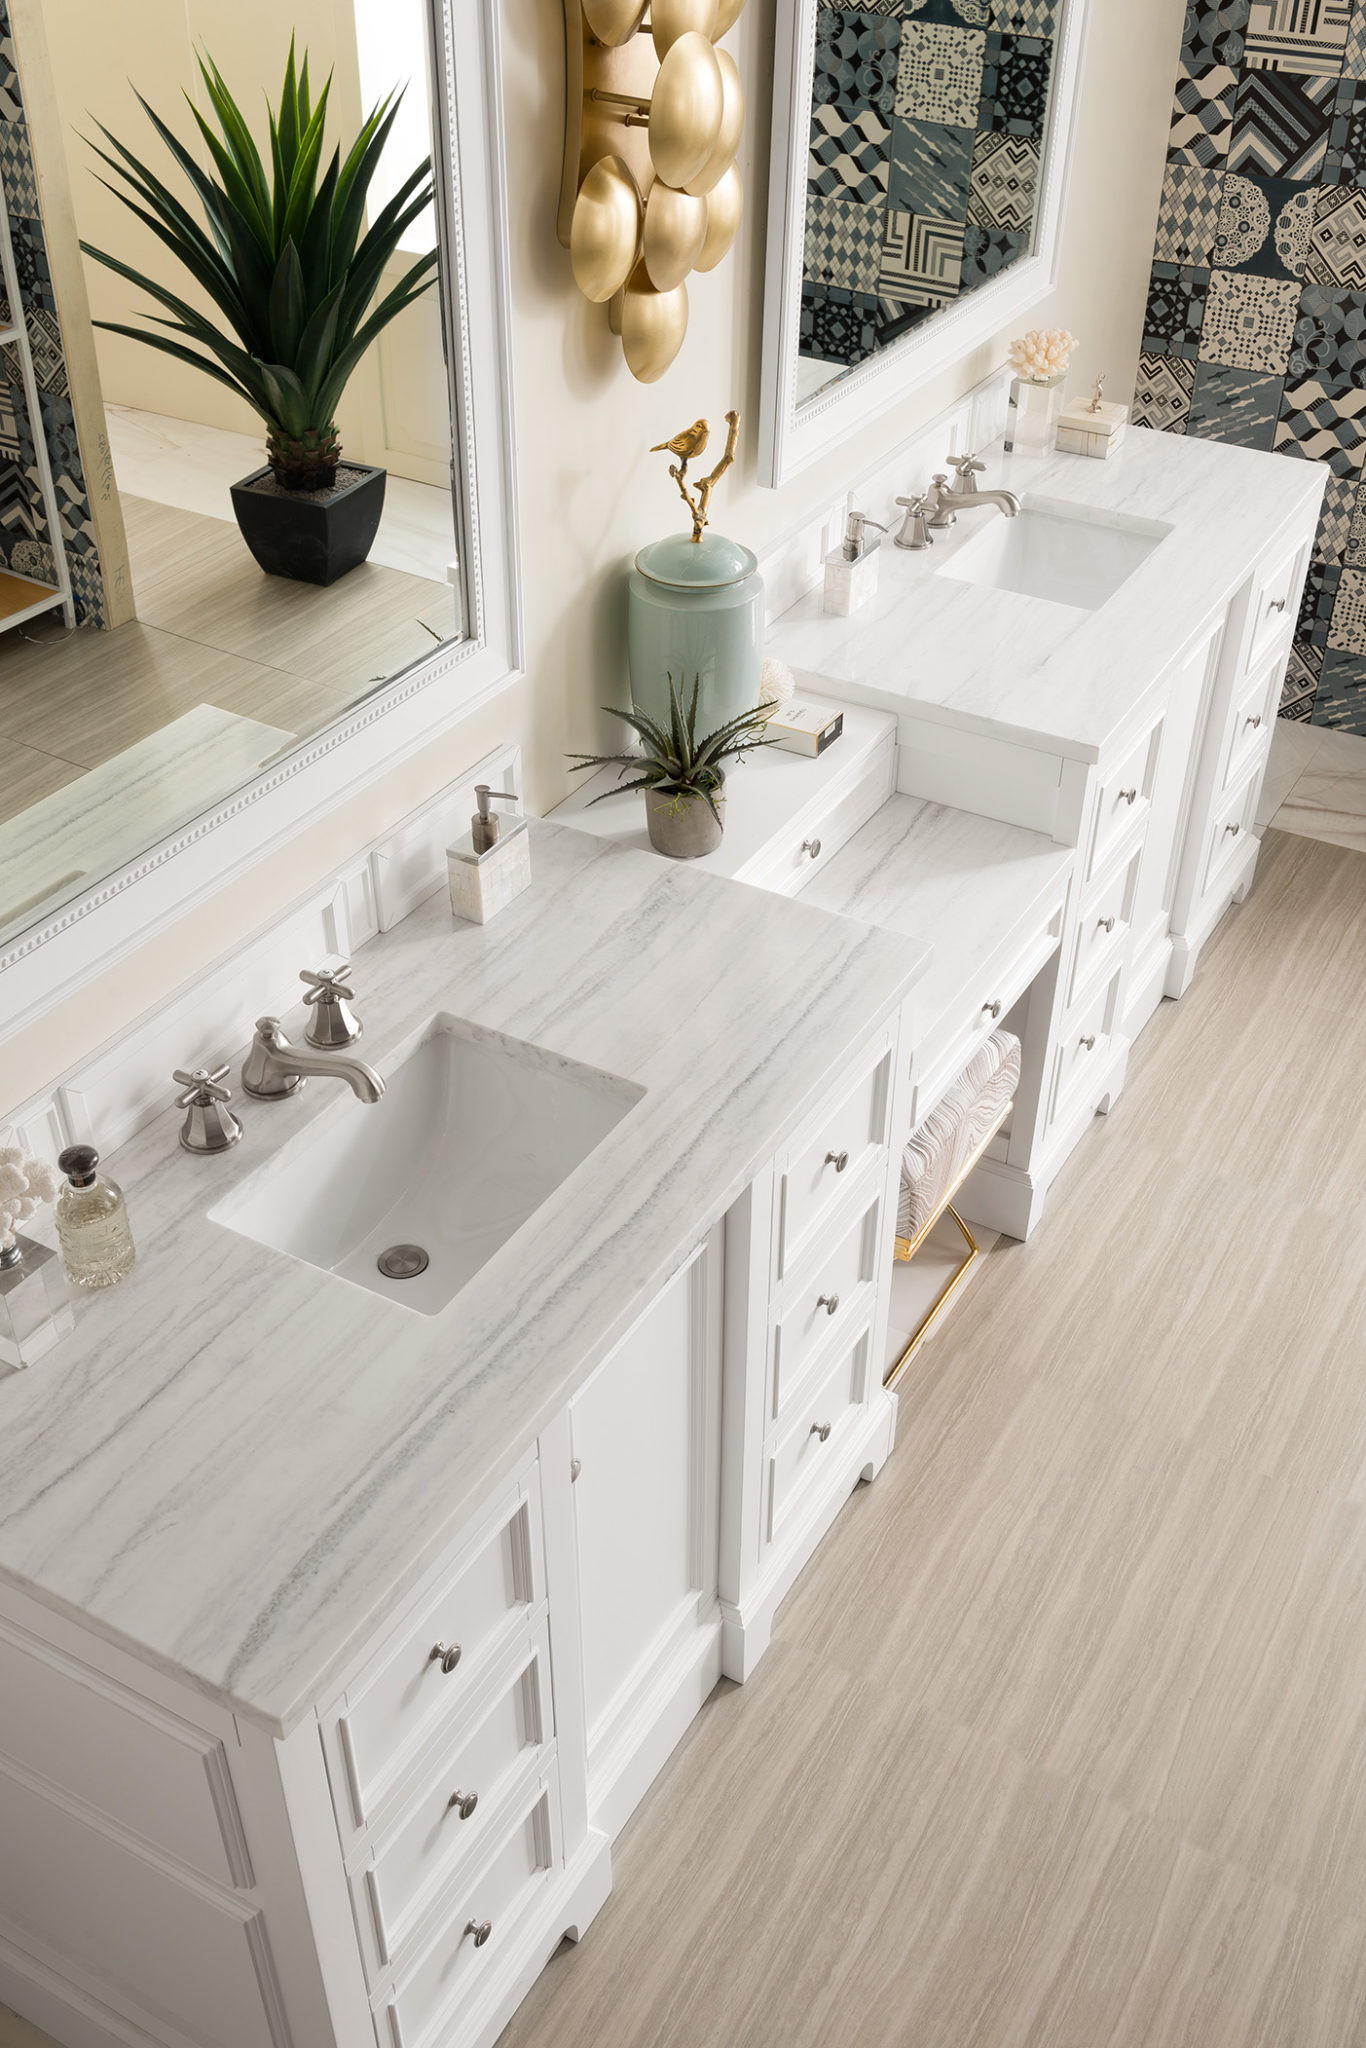 Bathroom Vanity With Makeup Table
 De Soto 118" Double Vanity Set Bright White with Makeup